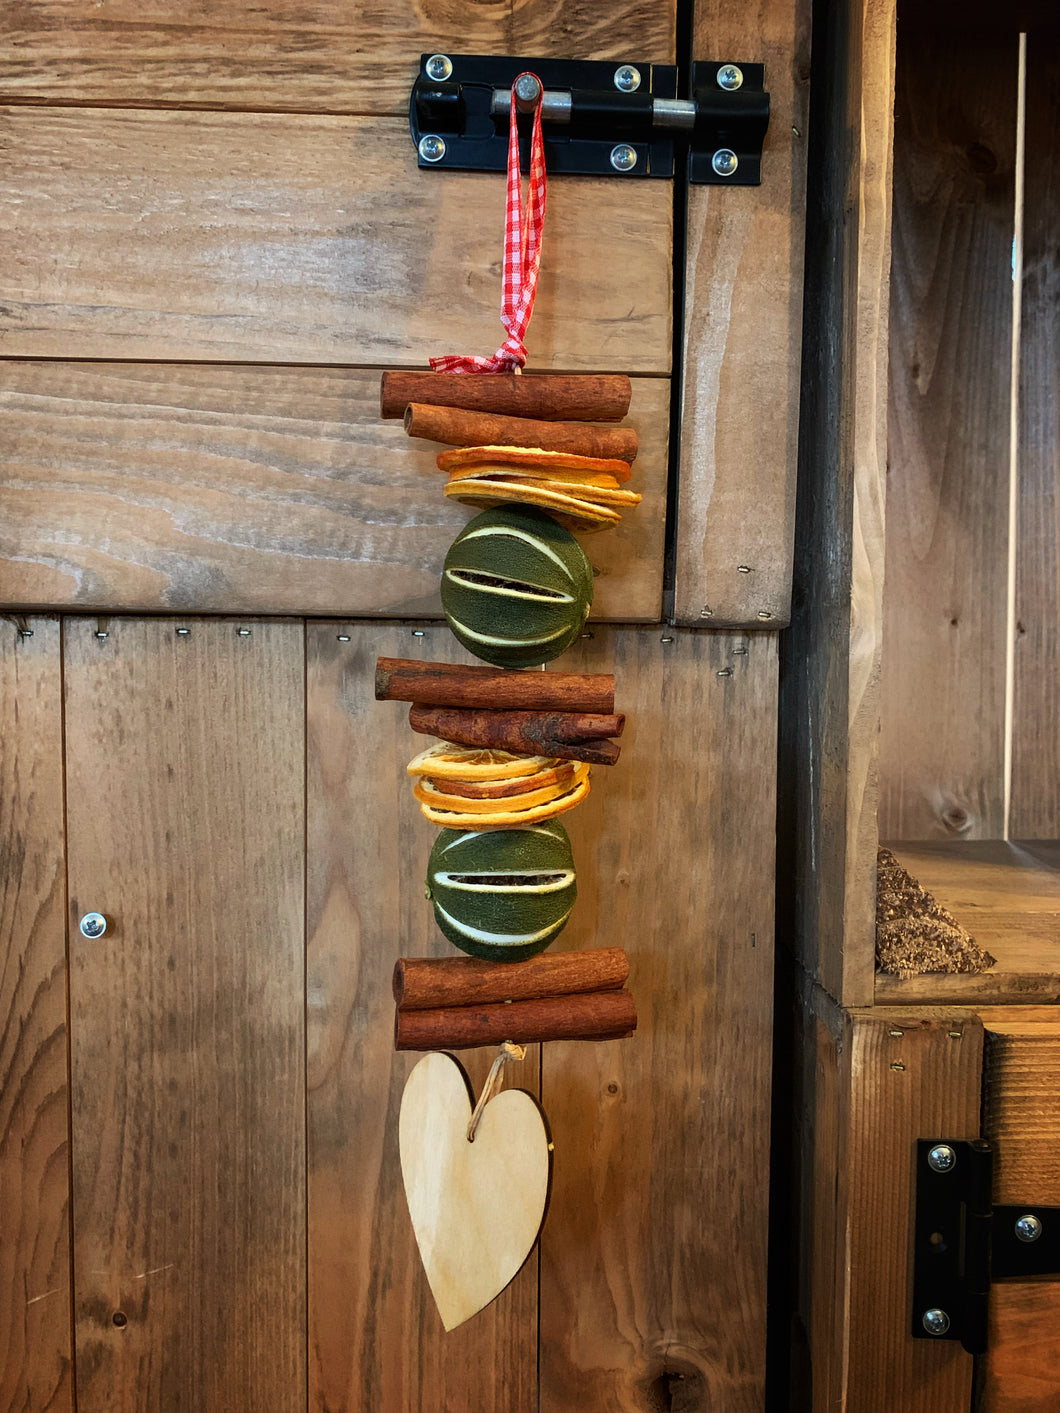 Image shows the Scents of the Season hanging garland Heart variant with dried whole limes with orange slices and cinnamon sticks with a wooden heart at the bottom